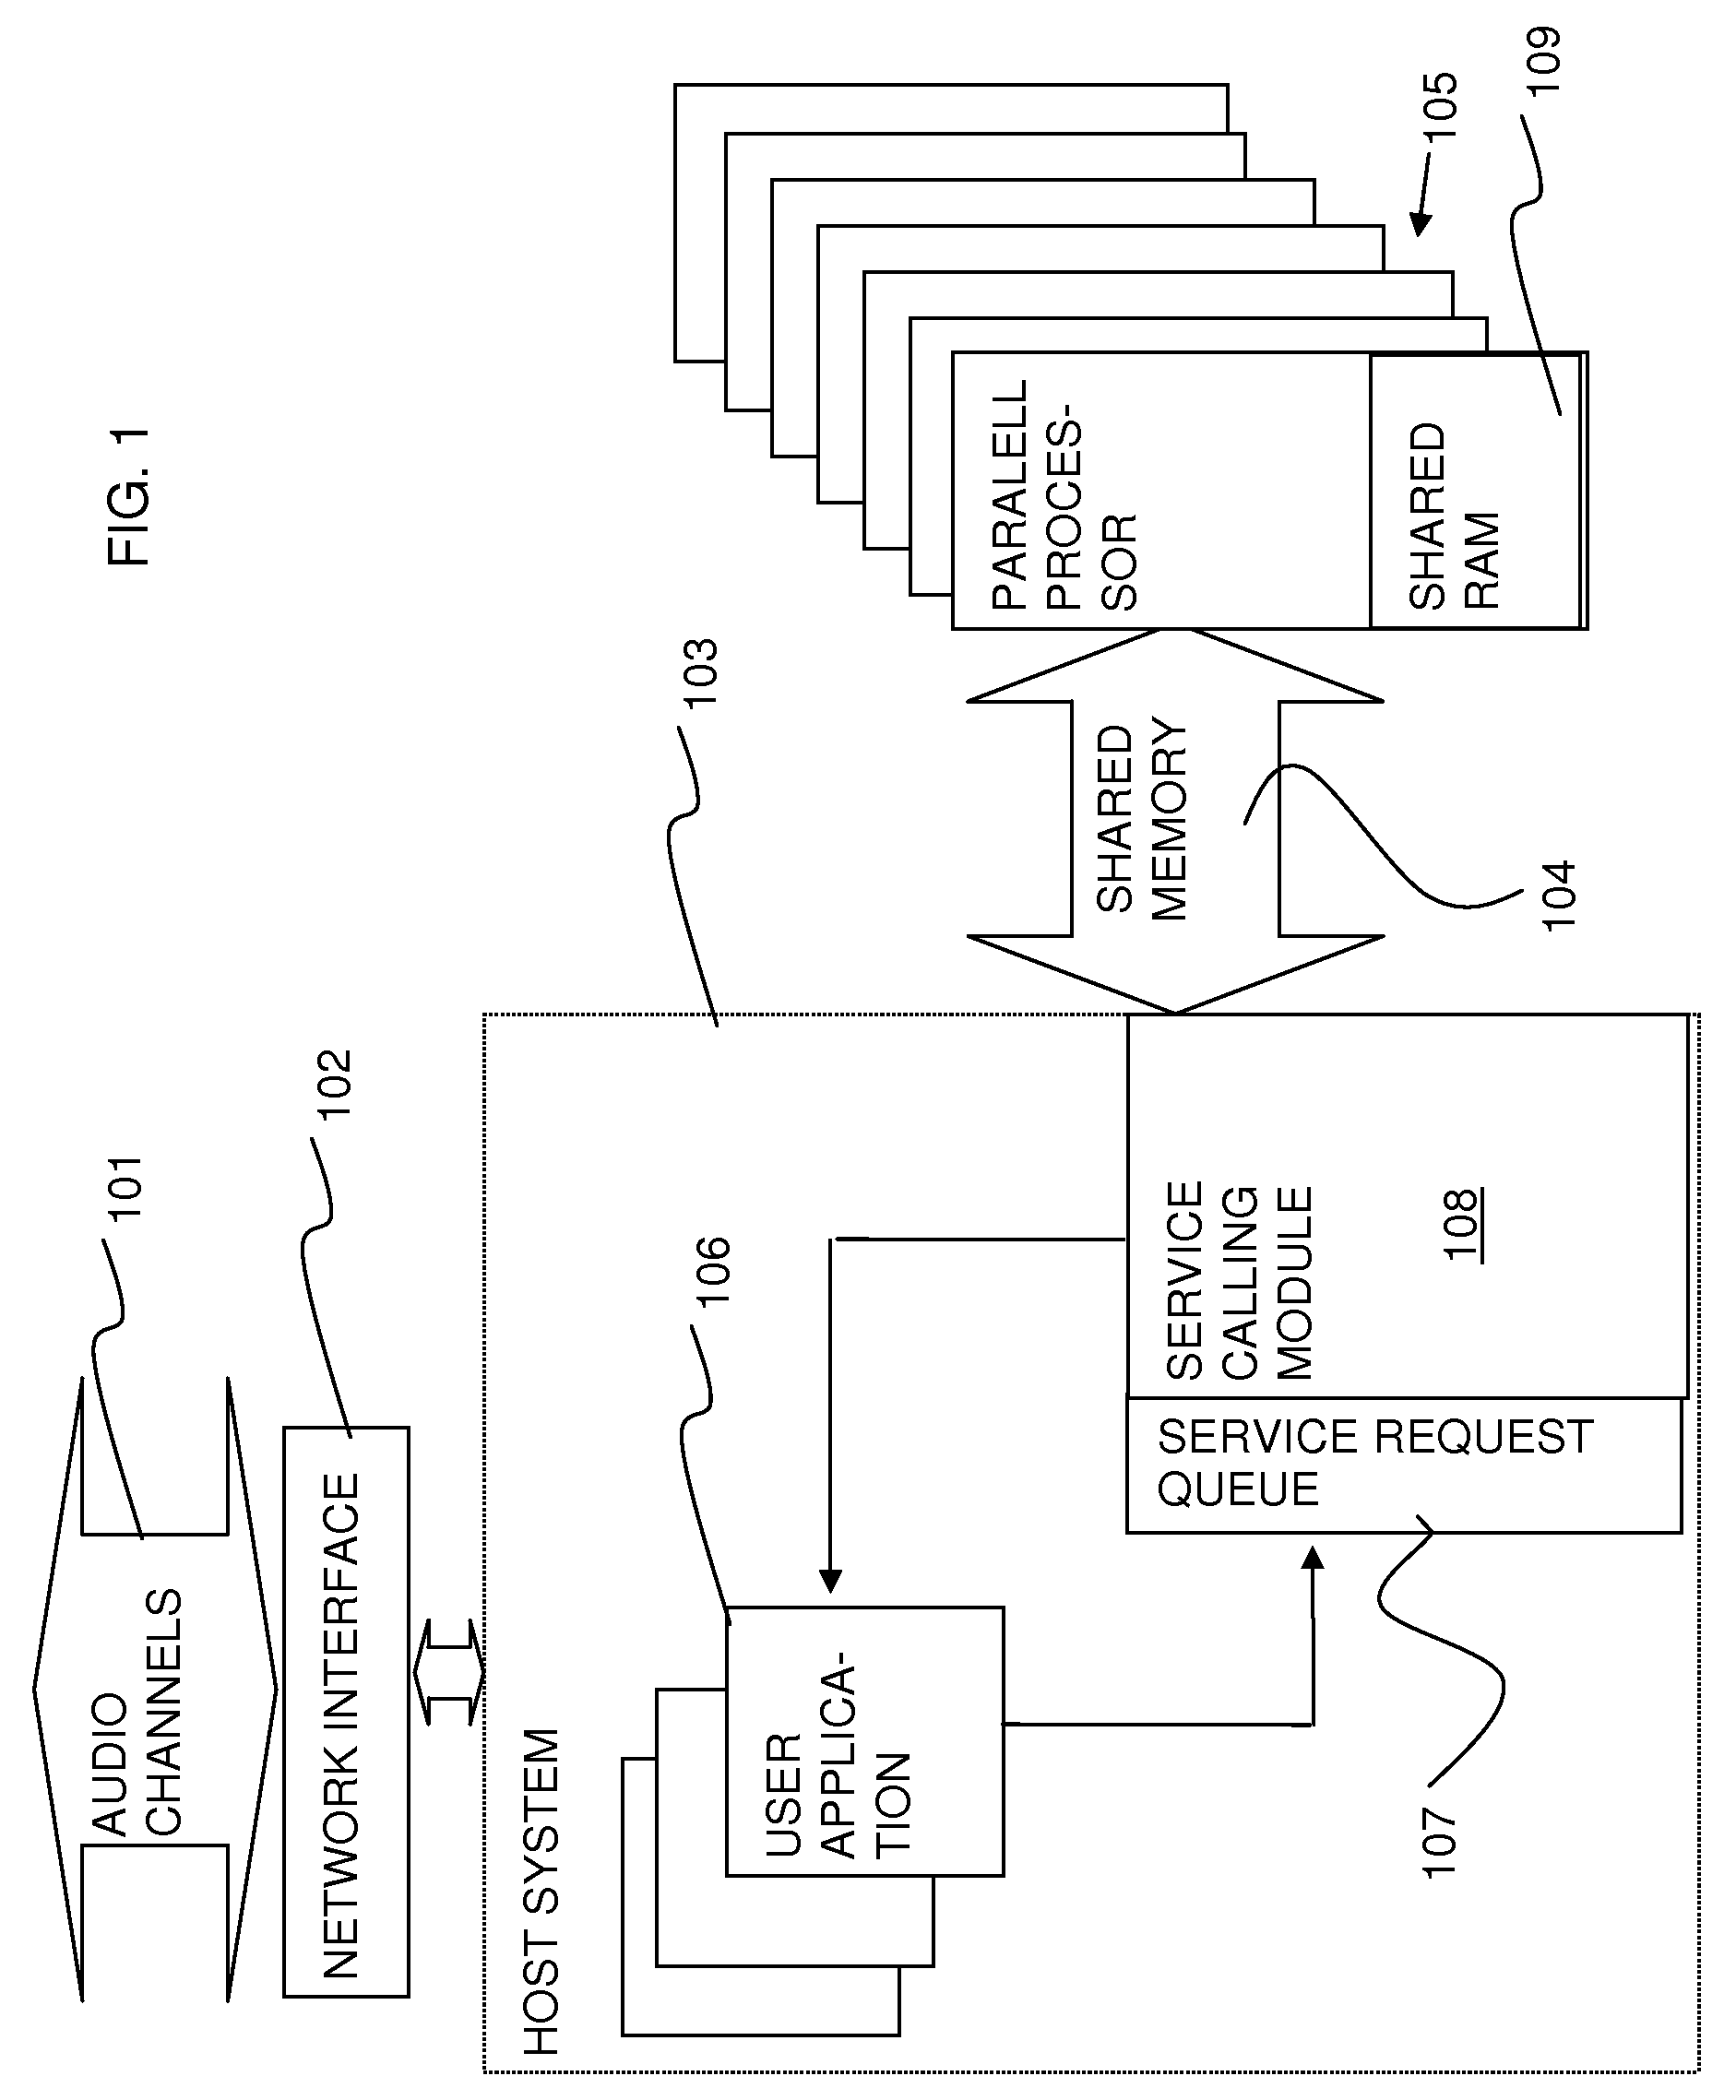 Parallel signal processing system and method